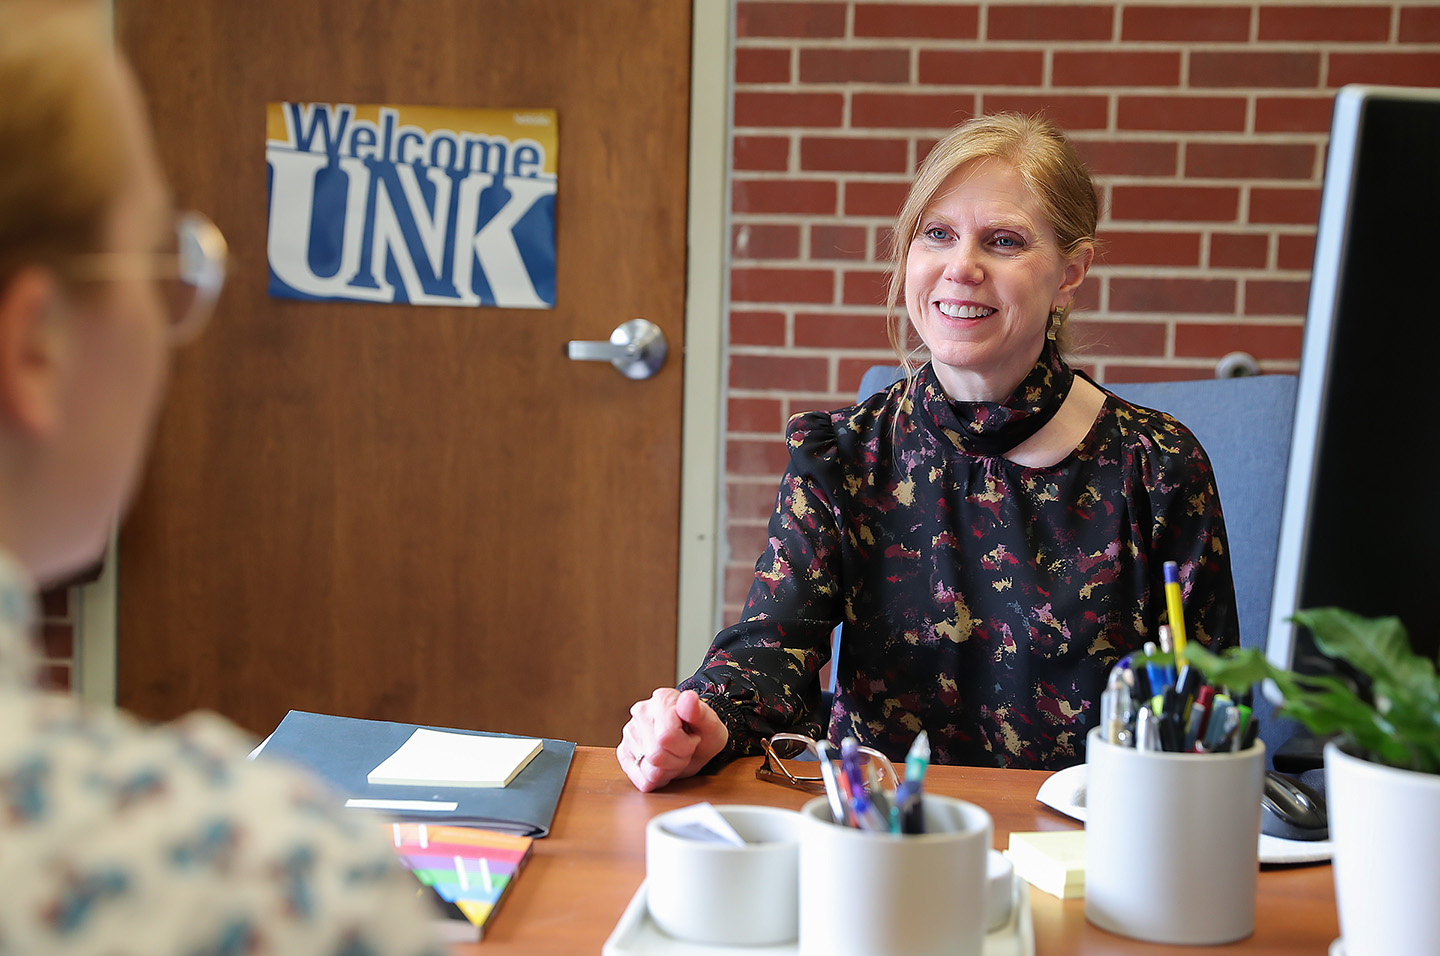 UNK Student Health and Counseling is implementing a collaborative care model that provides efficient and effective treatment for depression, anxiety, trauma and other mental health conditions. (Photo by Erika Pritchard, UNK Communications)